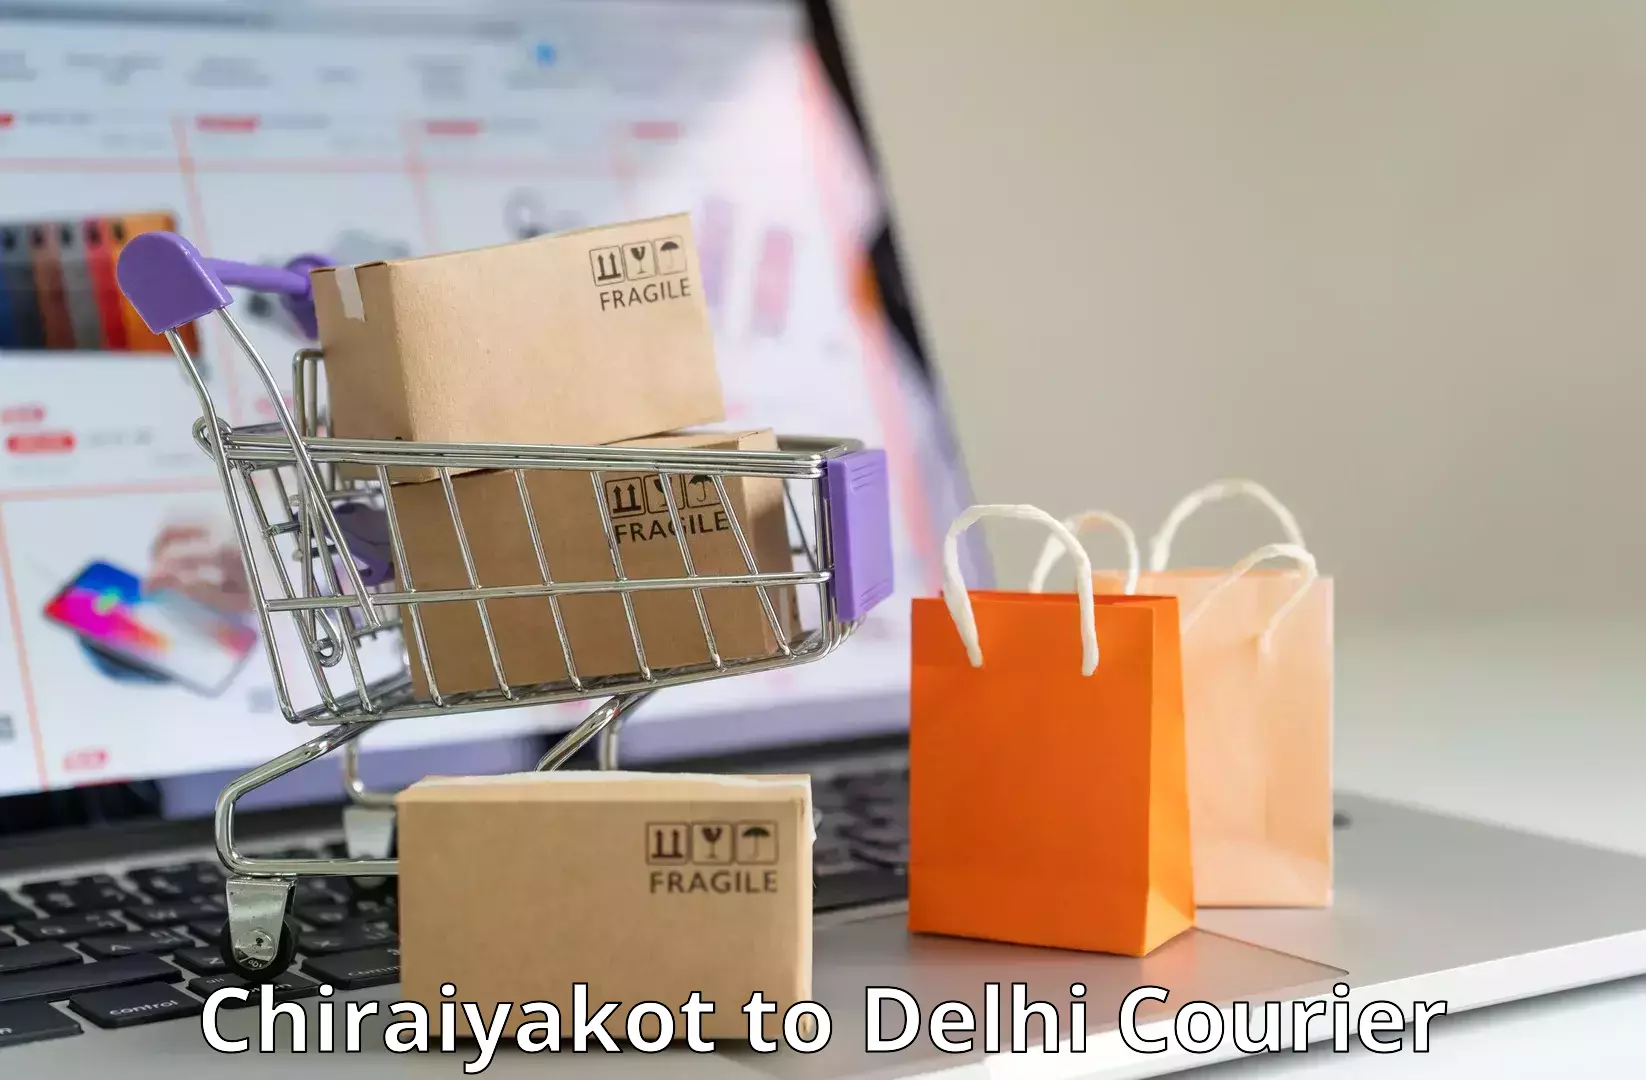 Parcel service for businesses Chiraiyakot to Lodhi Road